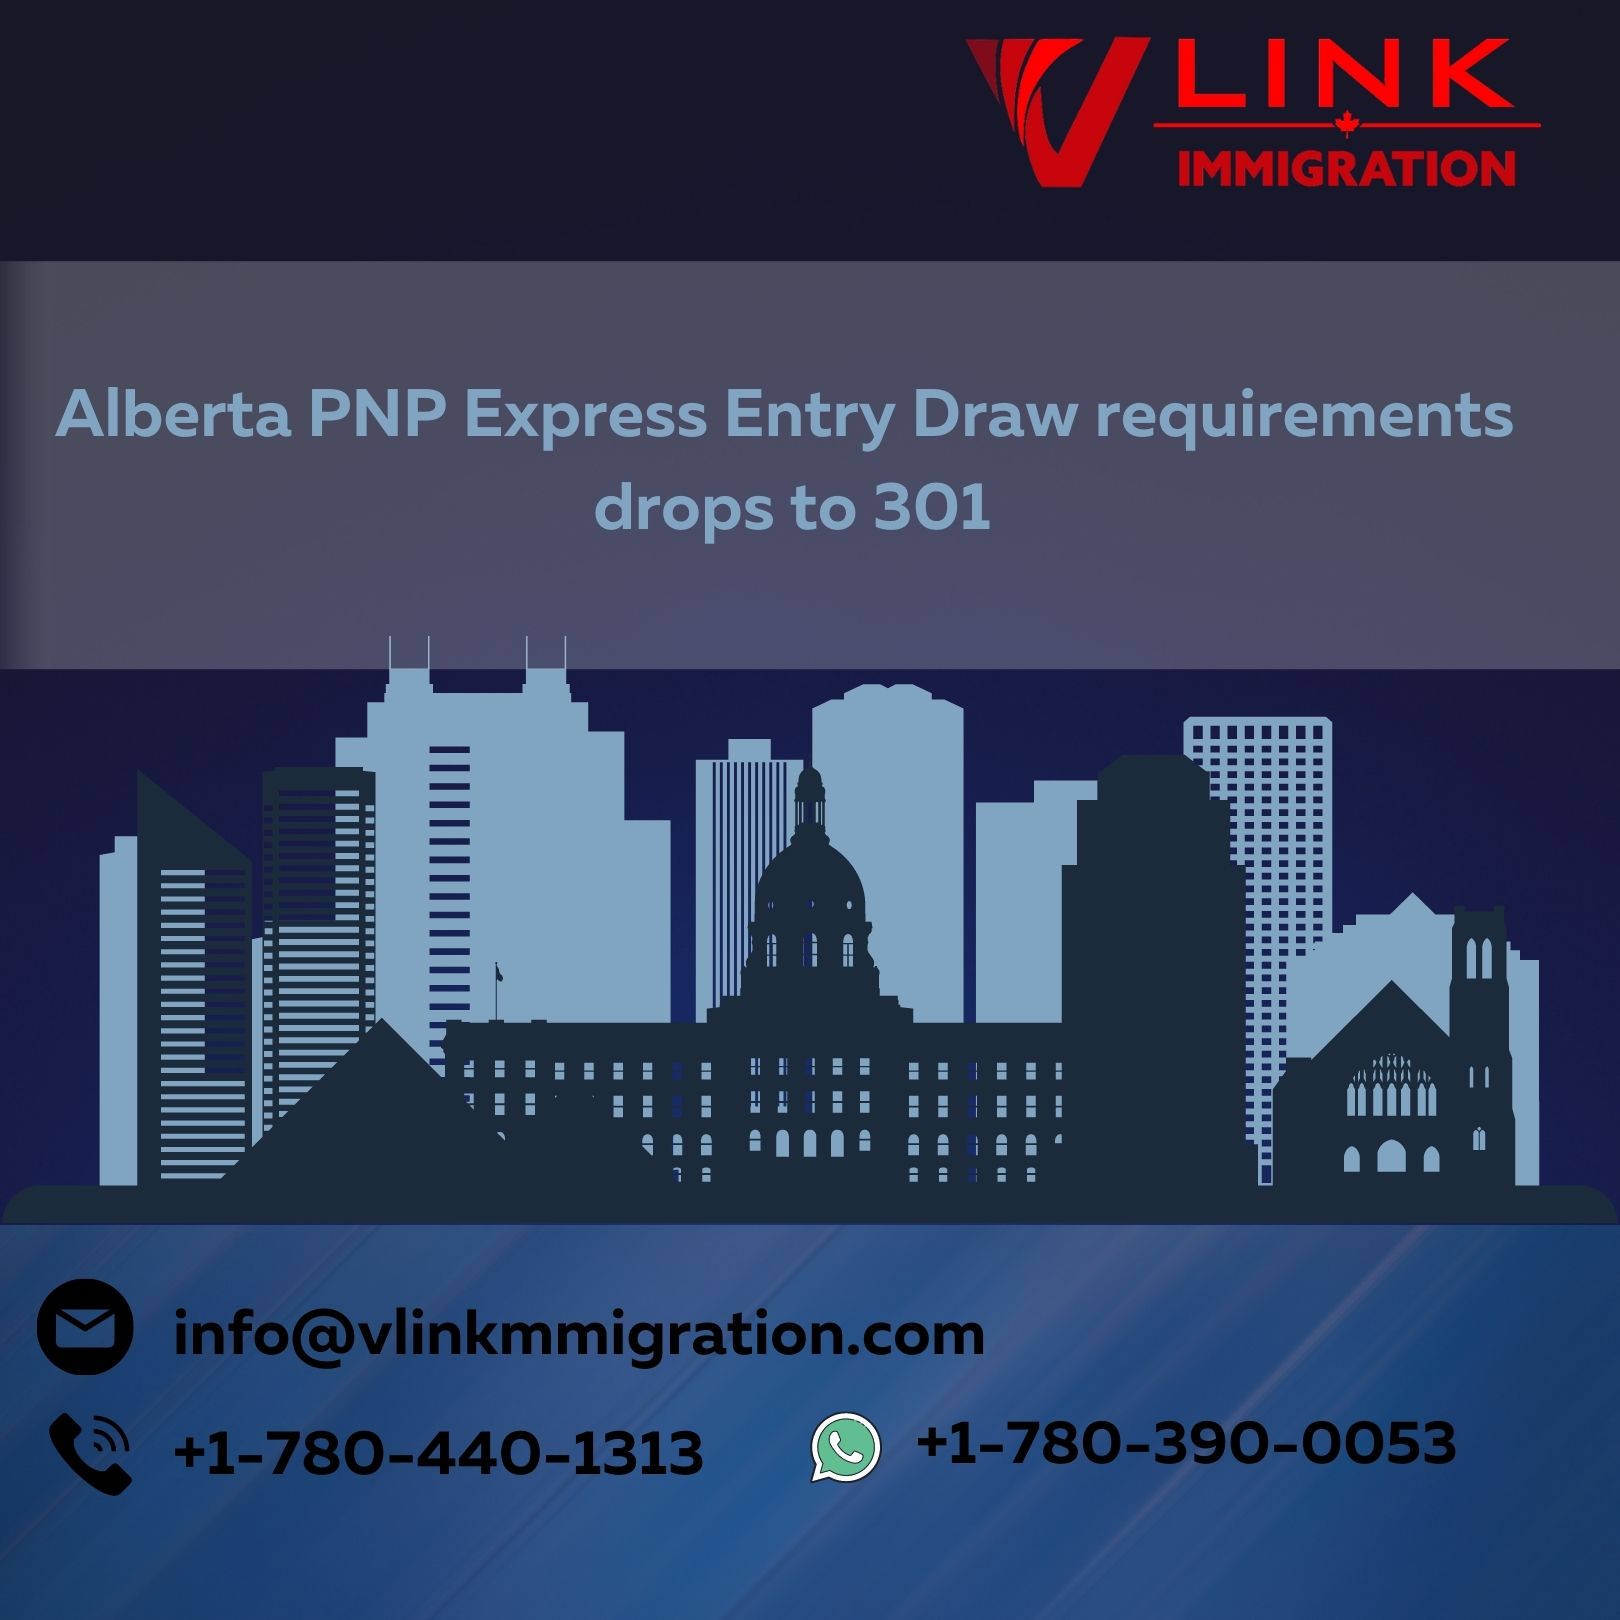 IRCC,Canadian immigration ,work permit,canadian immigration, cic processing time, immigration refugees and citizenship canada , express entry draws, canadian permanent residency,visitor visa extension, Saskatchewan immigrants nominee program, new immigration programs, Manitoba